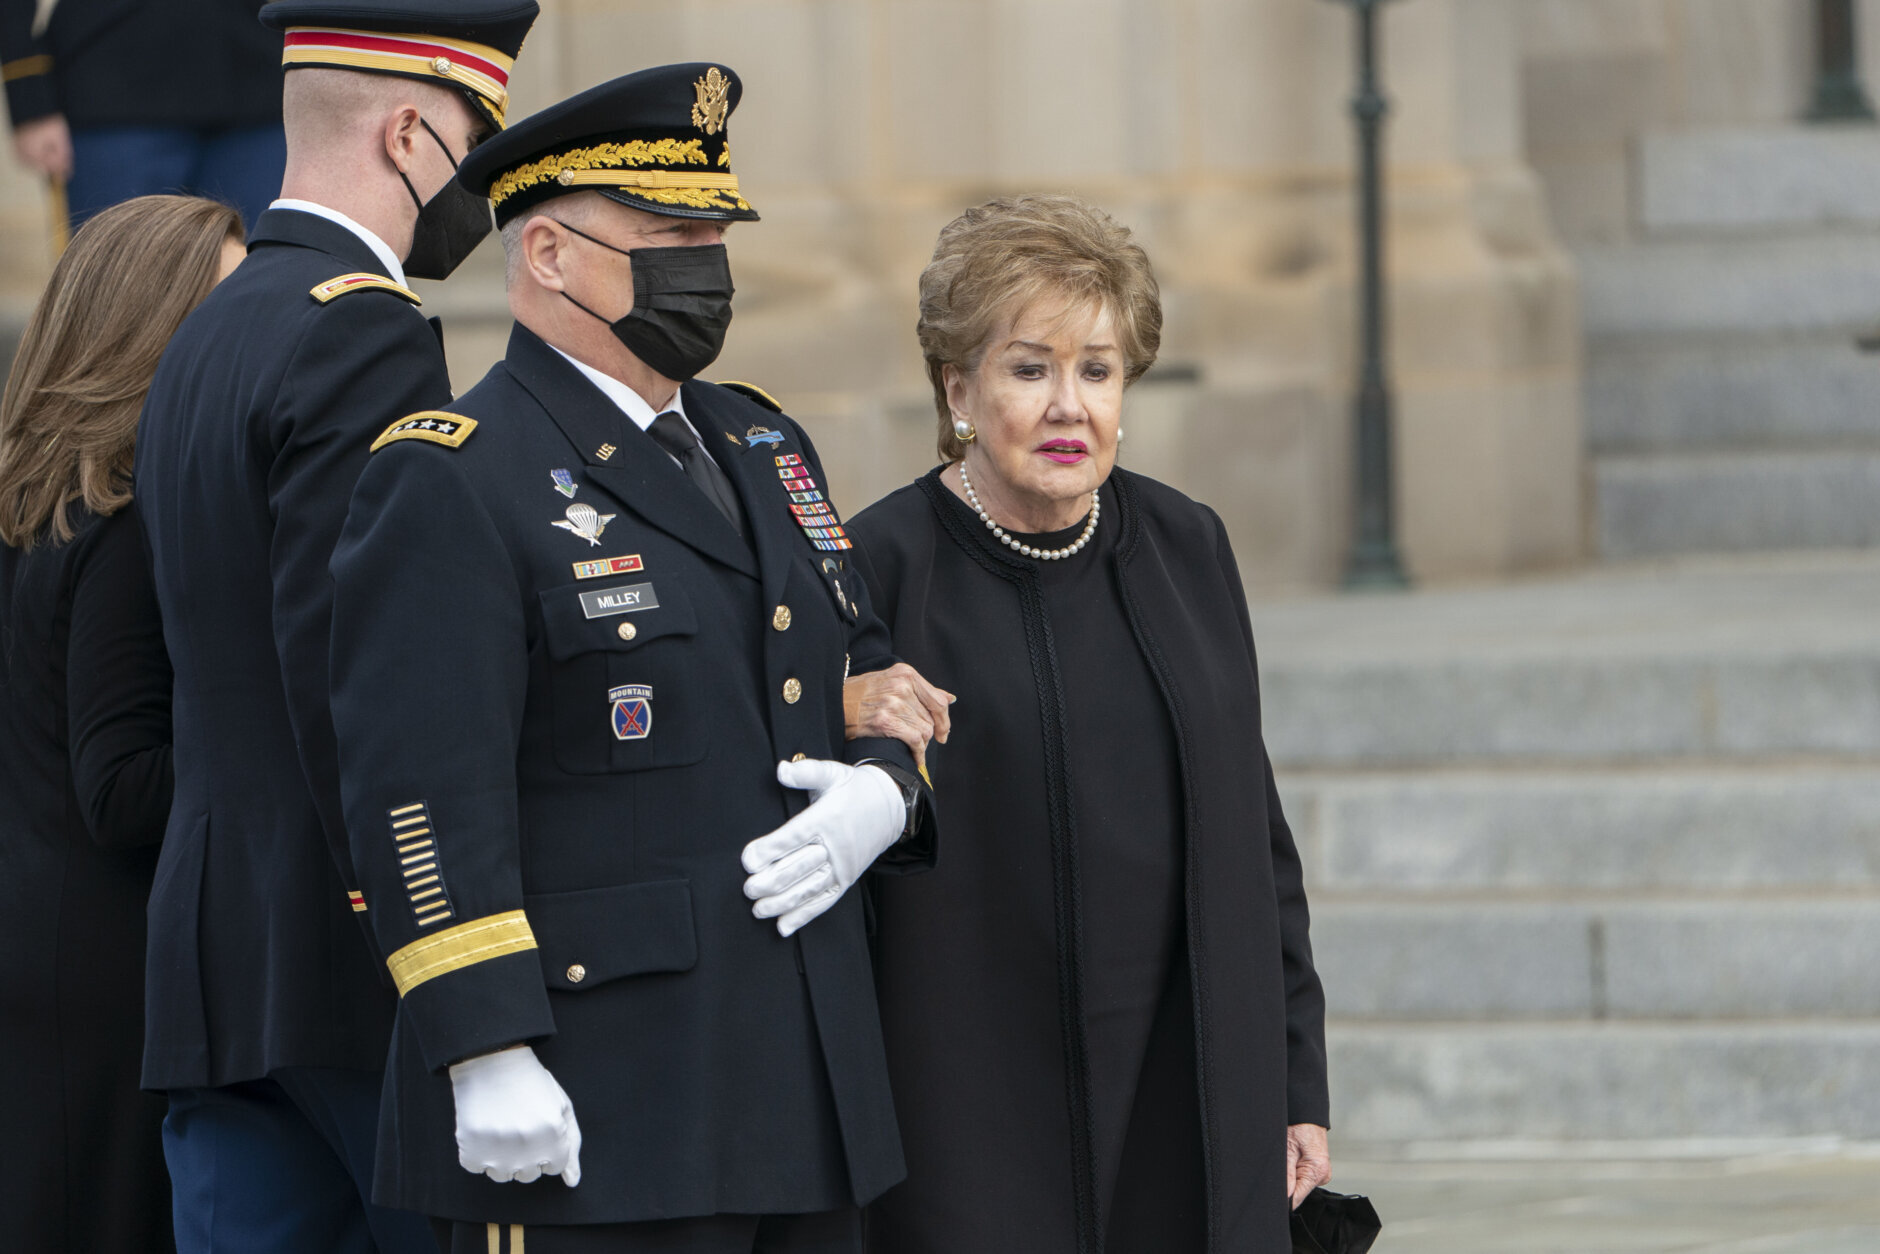 Former Sen. Elizabeth Dole, right, wife of former Sen. Bob Dole of Kansas, accompanied by Chairman of the Joint Chiefs Mark Milley, left, watch as the casket of former Sen. Bob Dole, is carried into the Washington National Cathedral for a funeral service, Friday, Dec. 10, 2021, in Washington. (AP Photo/Manuel Balce Ceneta)